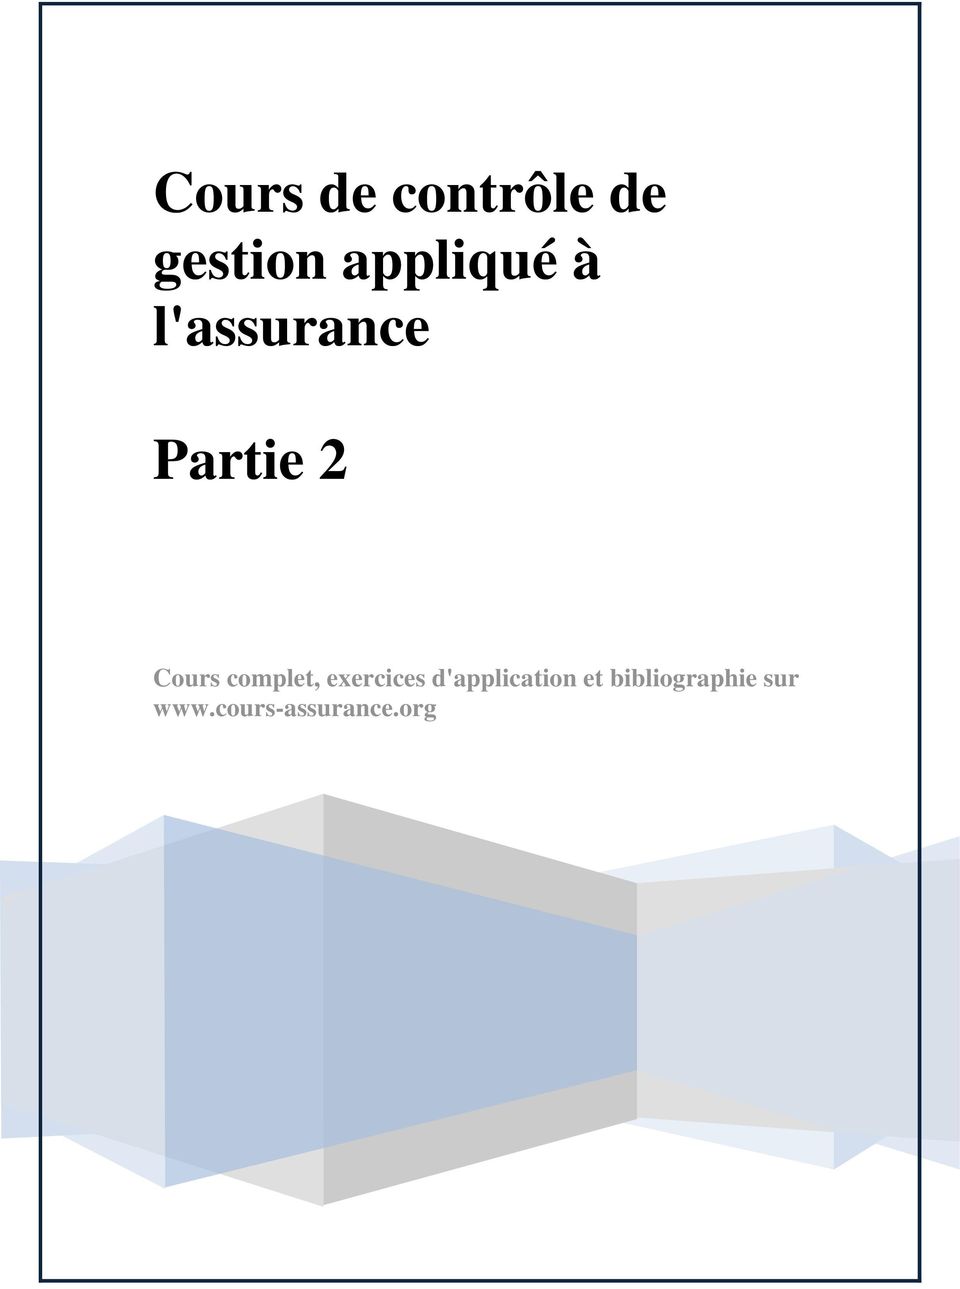 Cours complet, exercices